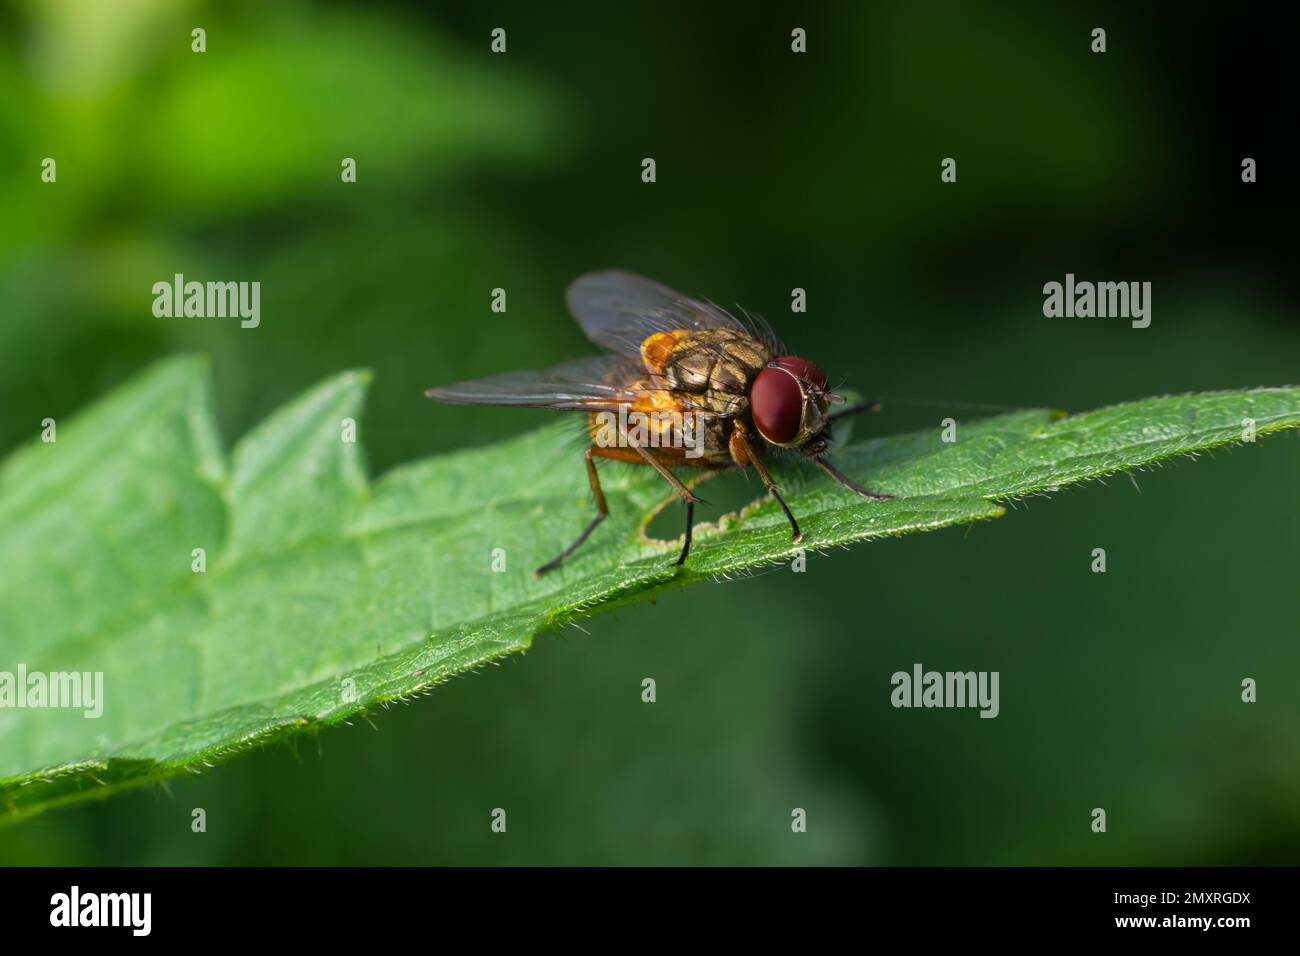 Mydaea corni A large brown fly living in moist stands on the edge of spruce forests. Stock Photo